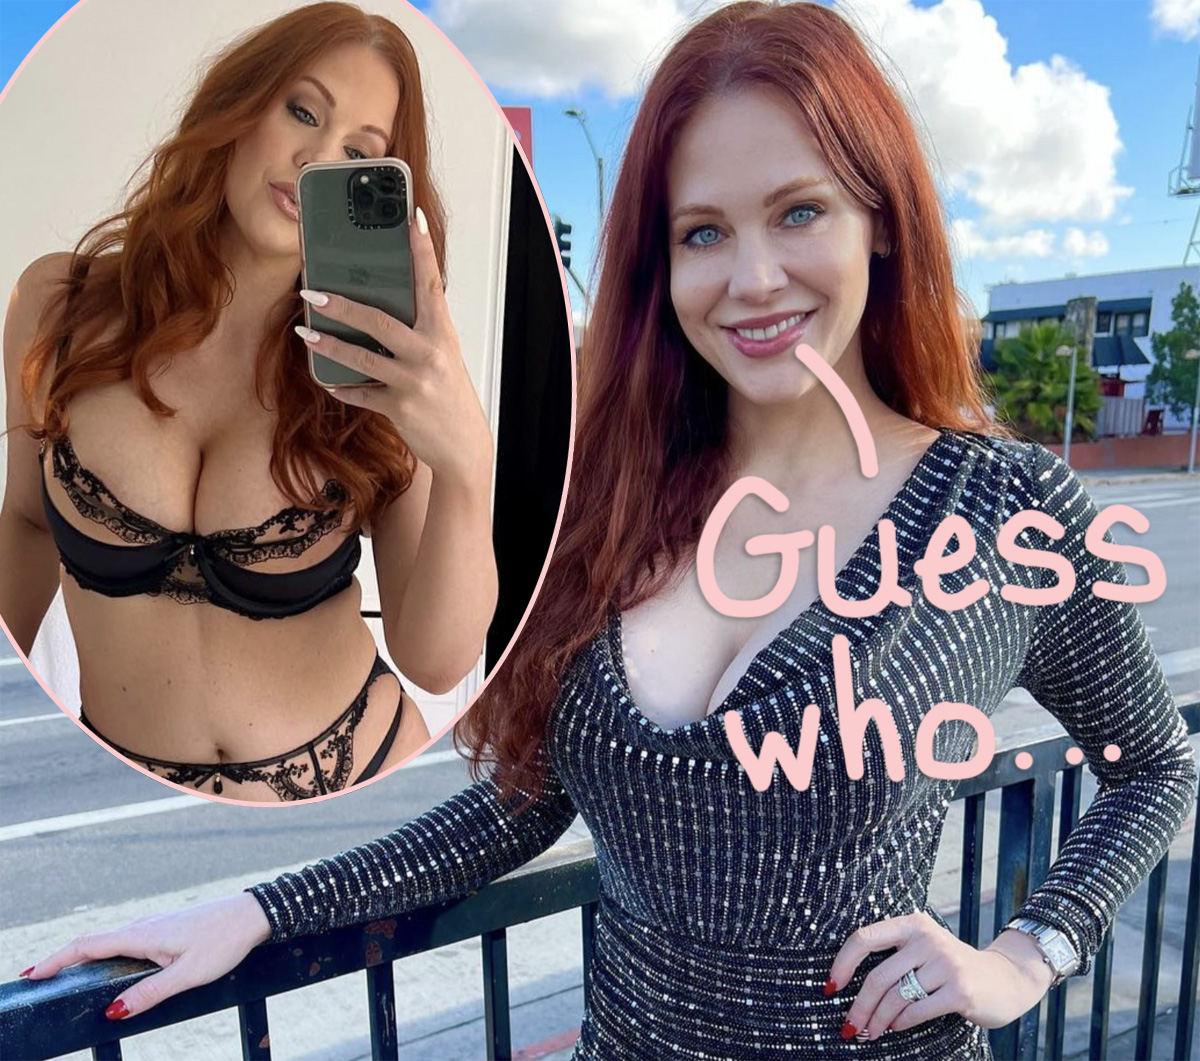 #Porn Star & Boy Meets World Alum Maitland Ward Claims WHICH Celeb Asked Her To Hook Up?!